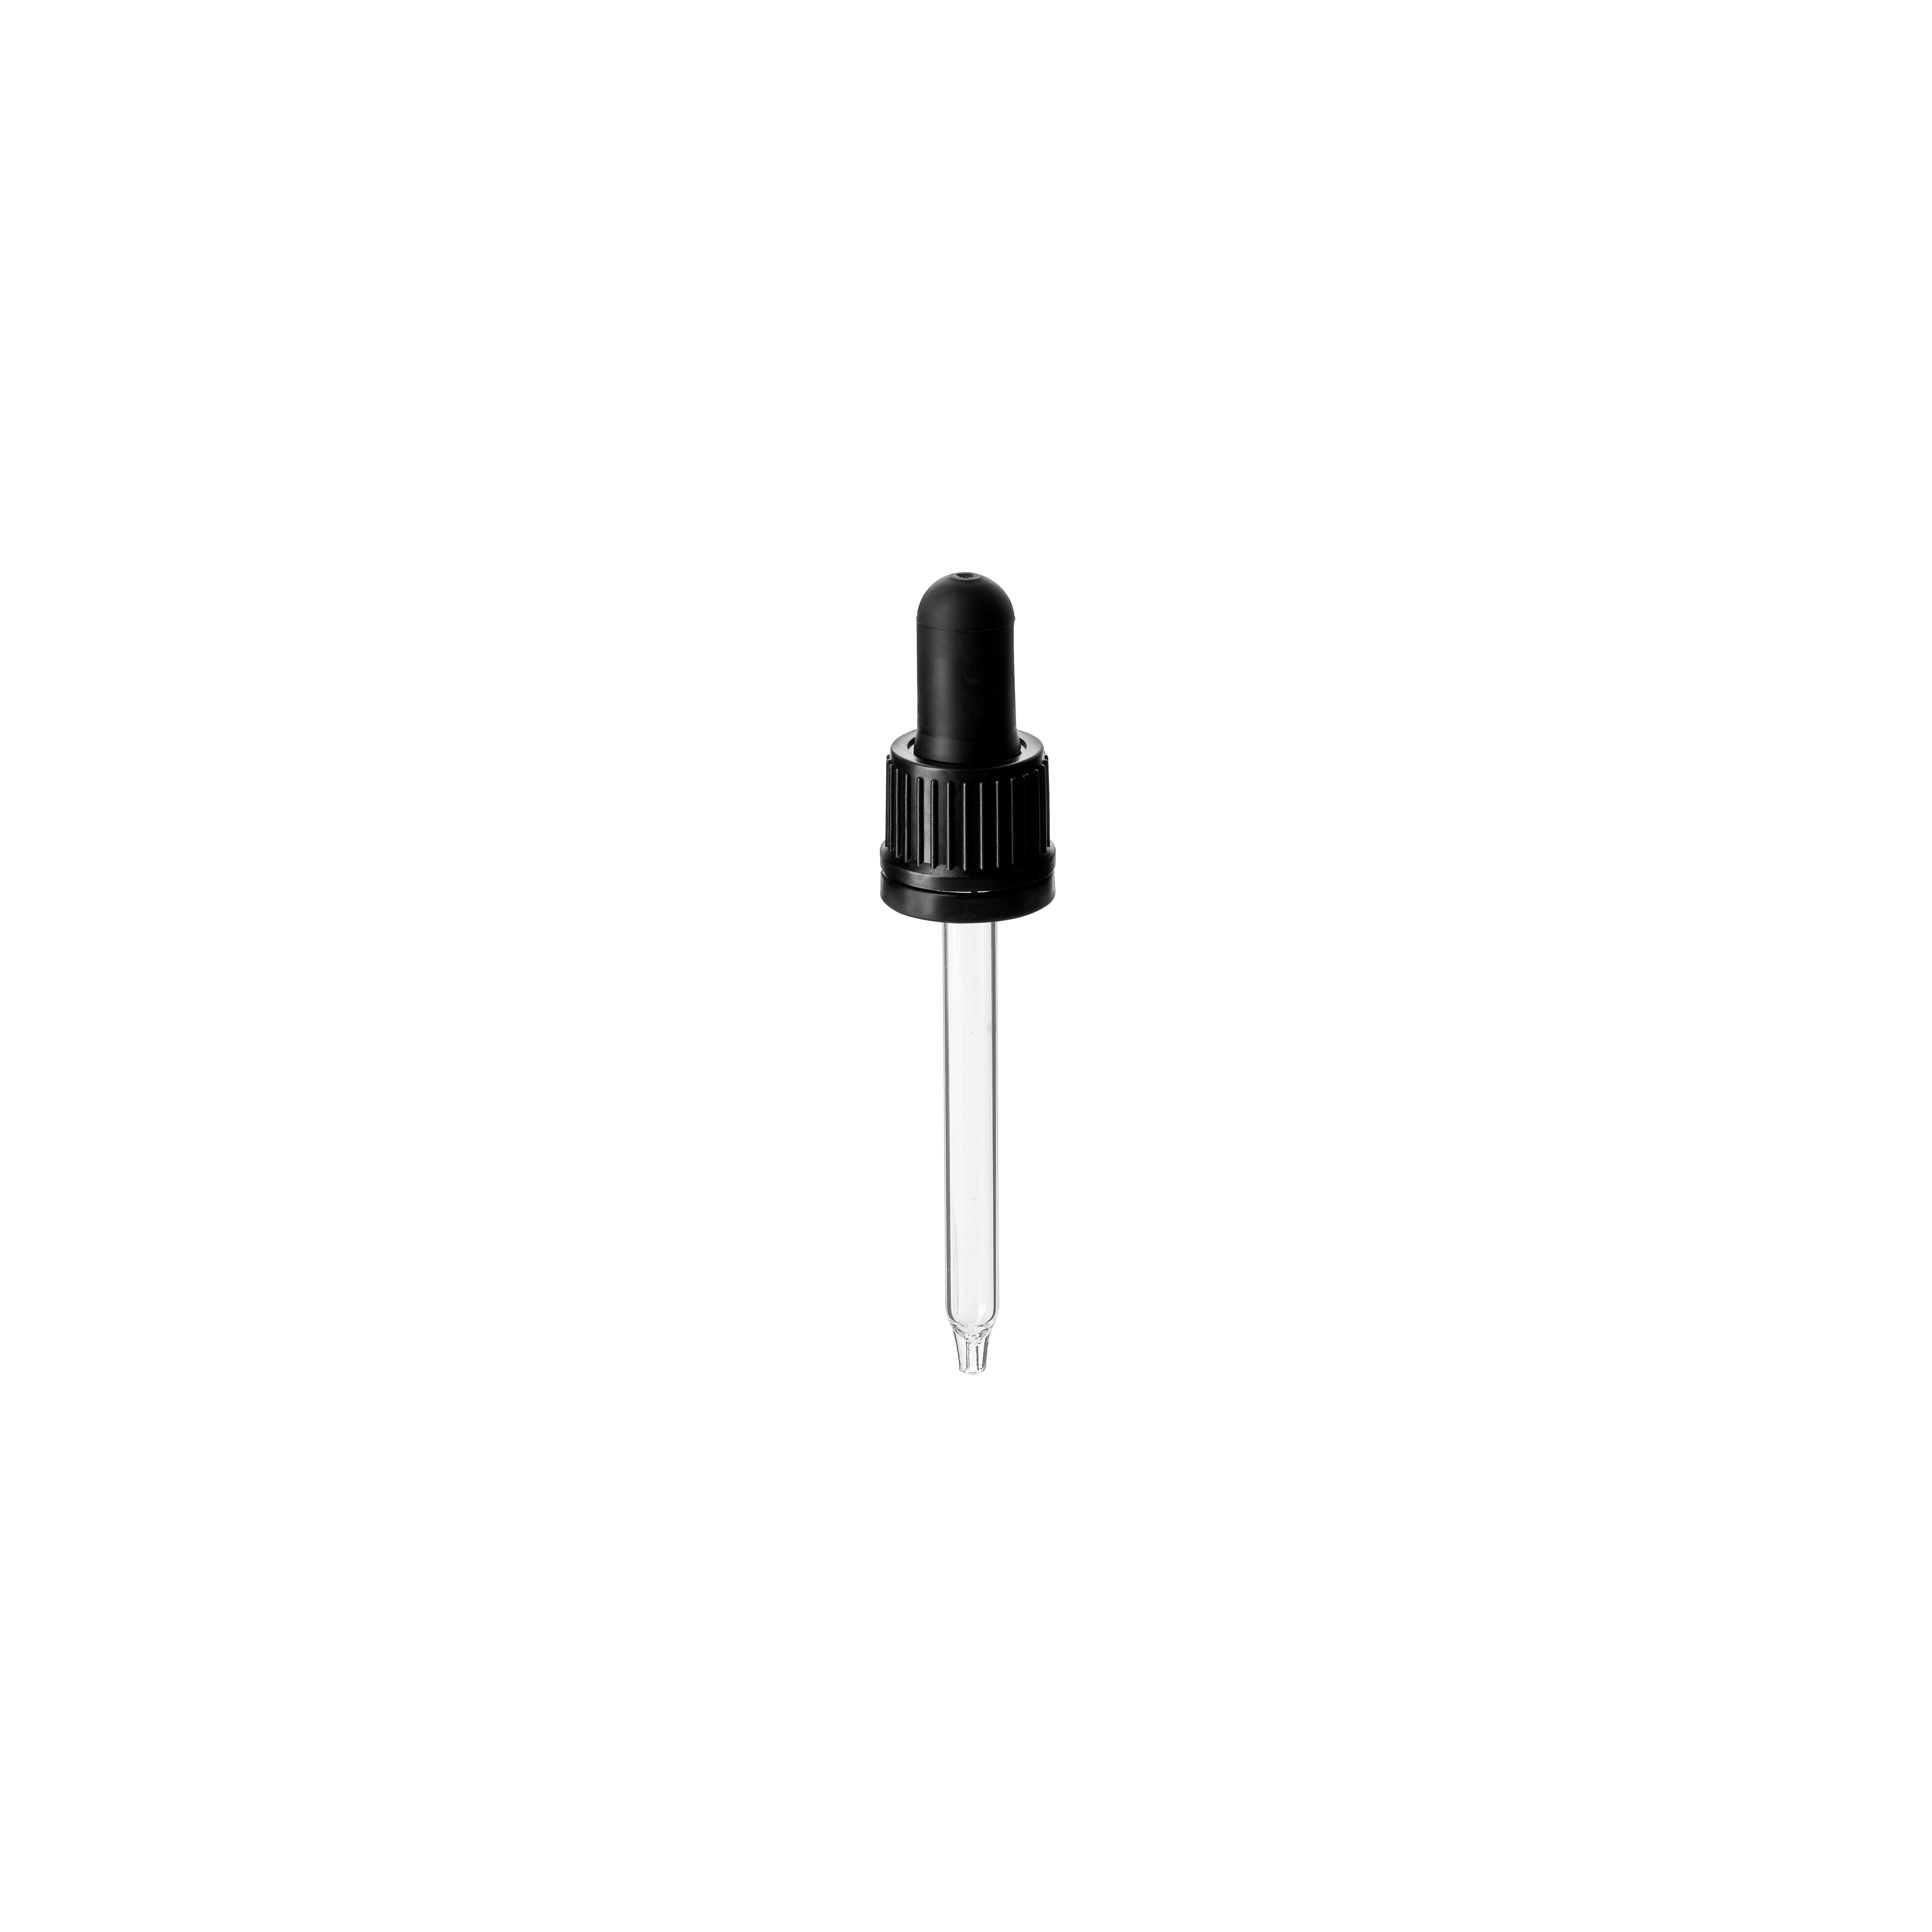 Pipette series II, DIN18, tamper-evident, PP, black, ribbed, black bulb TPE 1.0 ml, conical tip with 1.0 opening for Ginger 50 ml